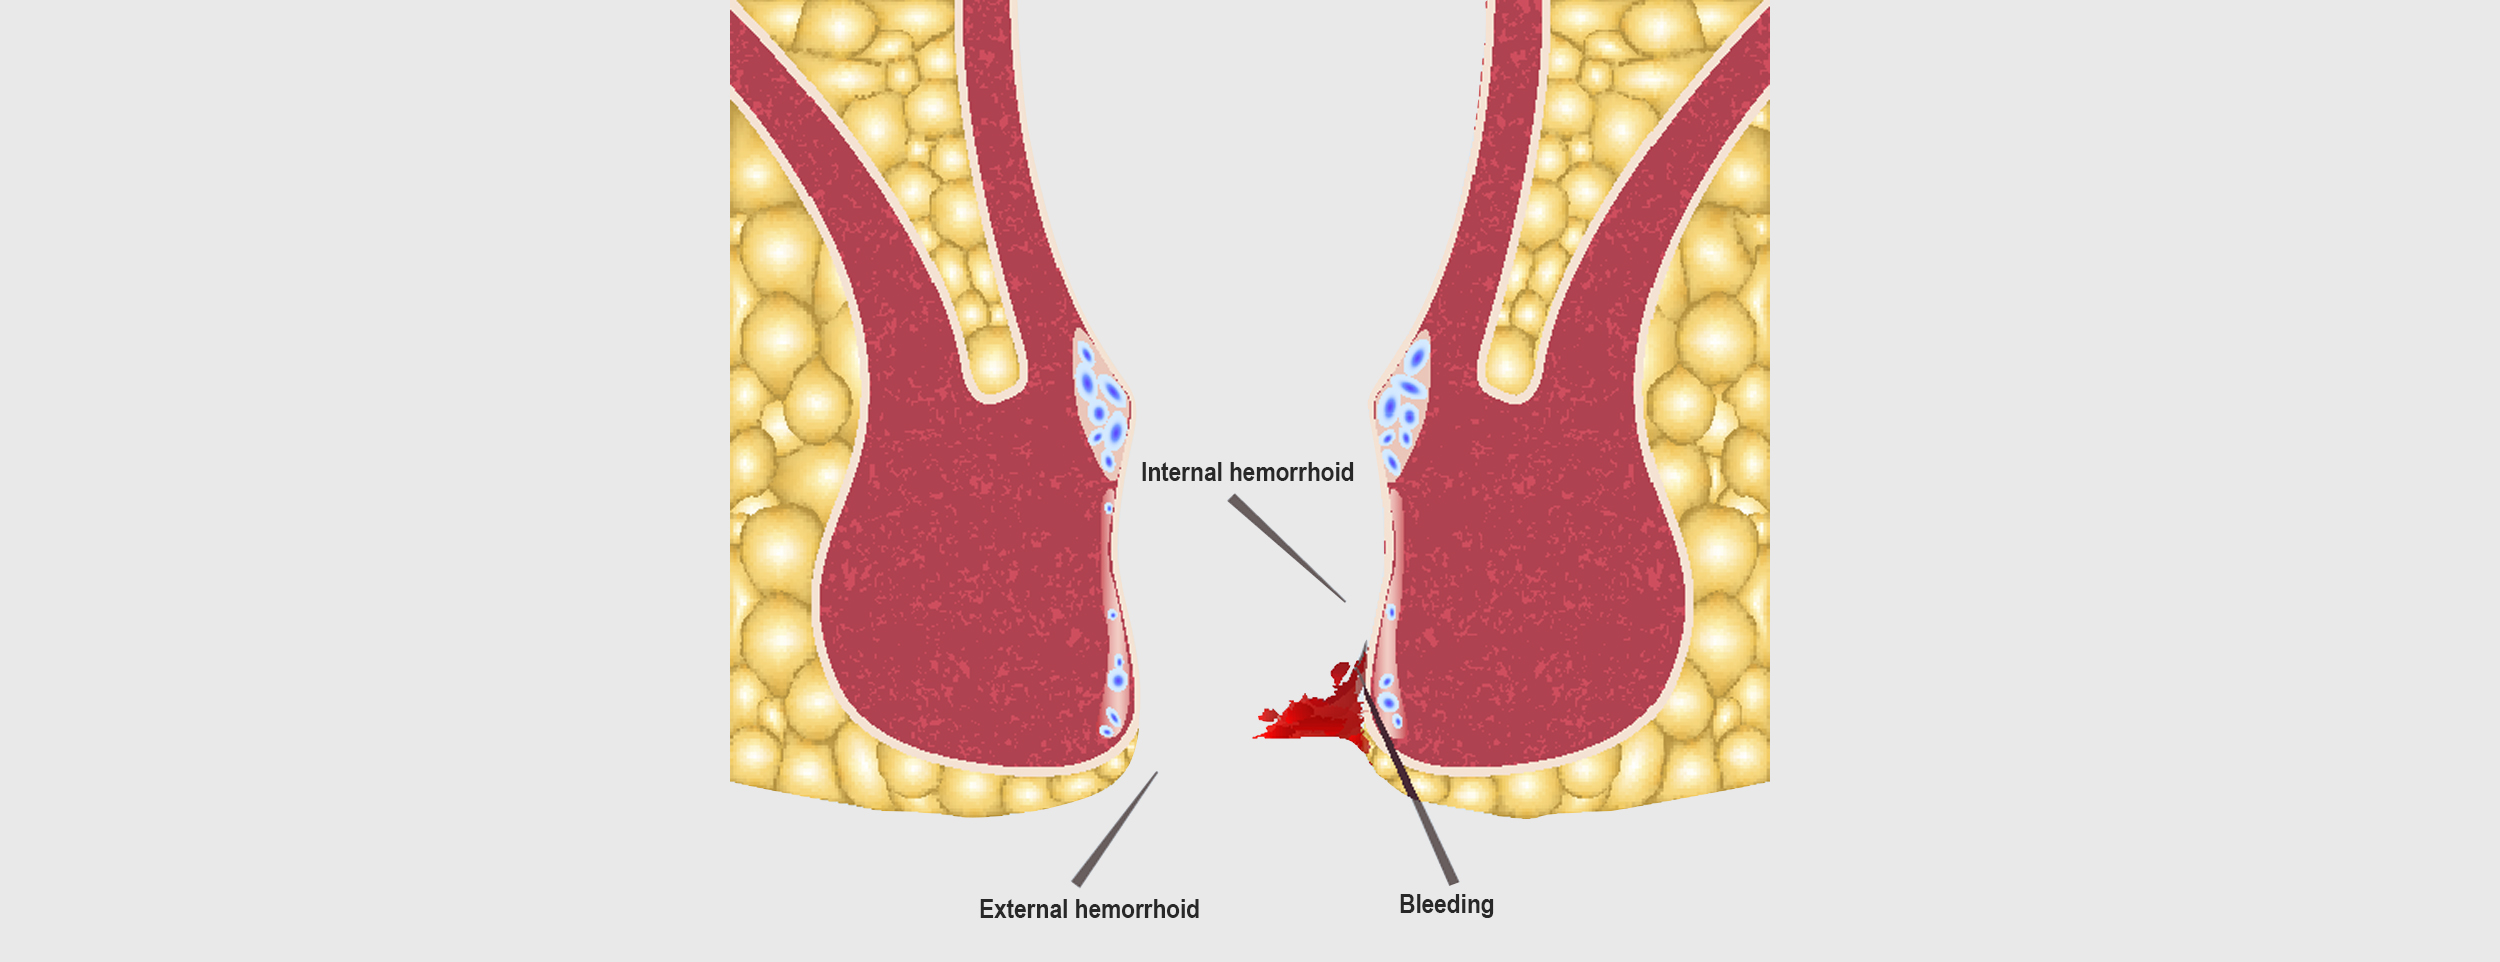 A hemorrhoid abscess is a bleed or discharge from the rectum